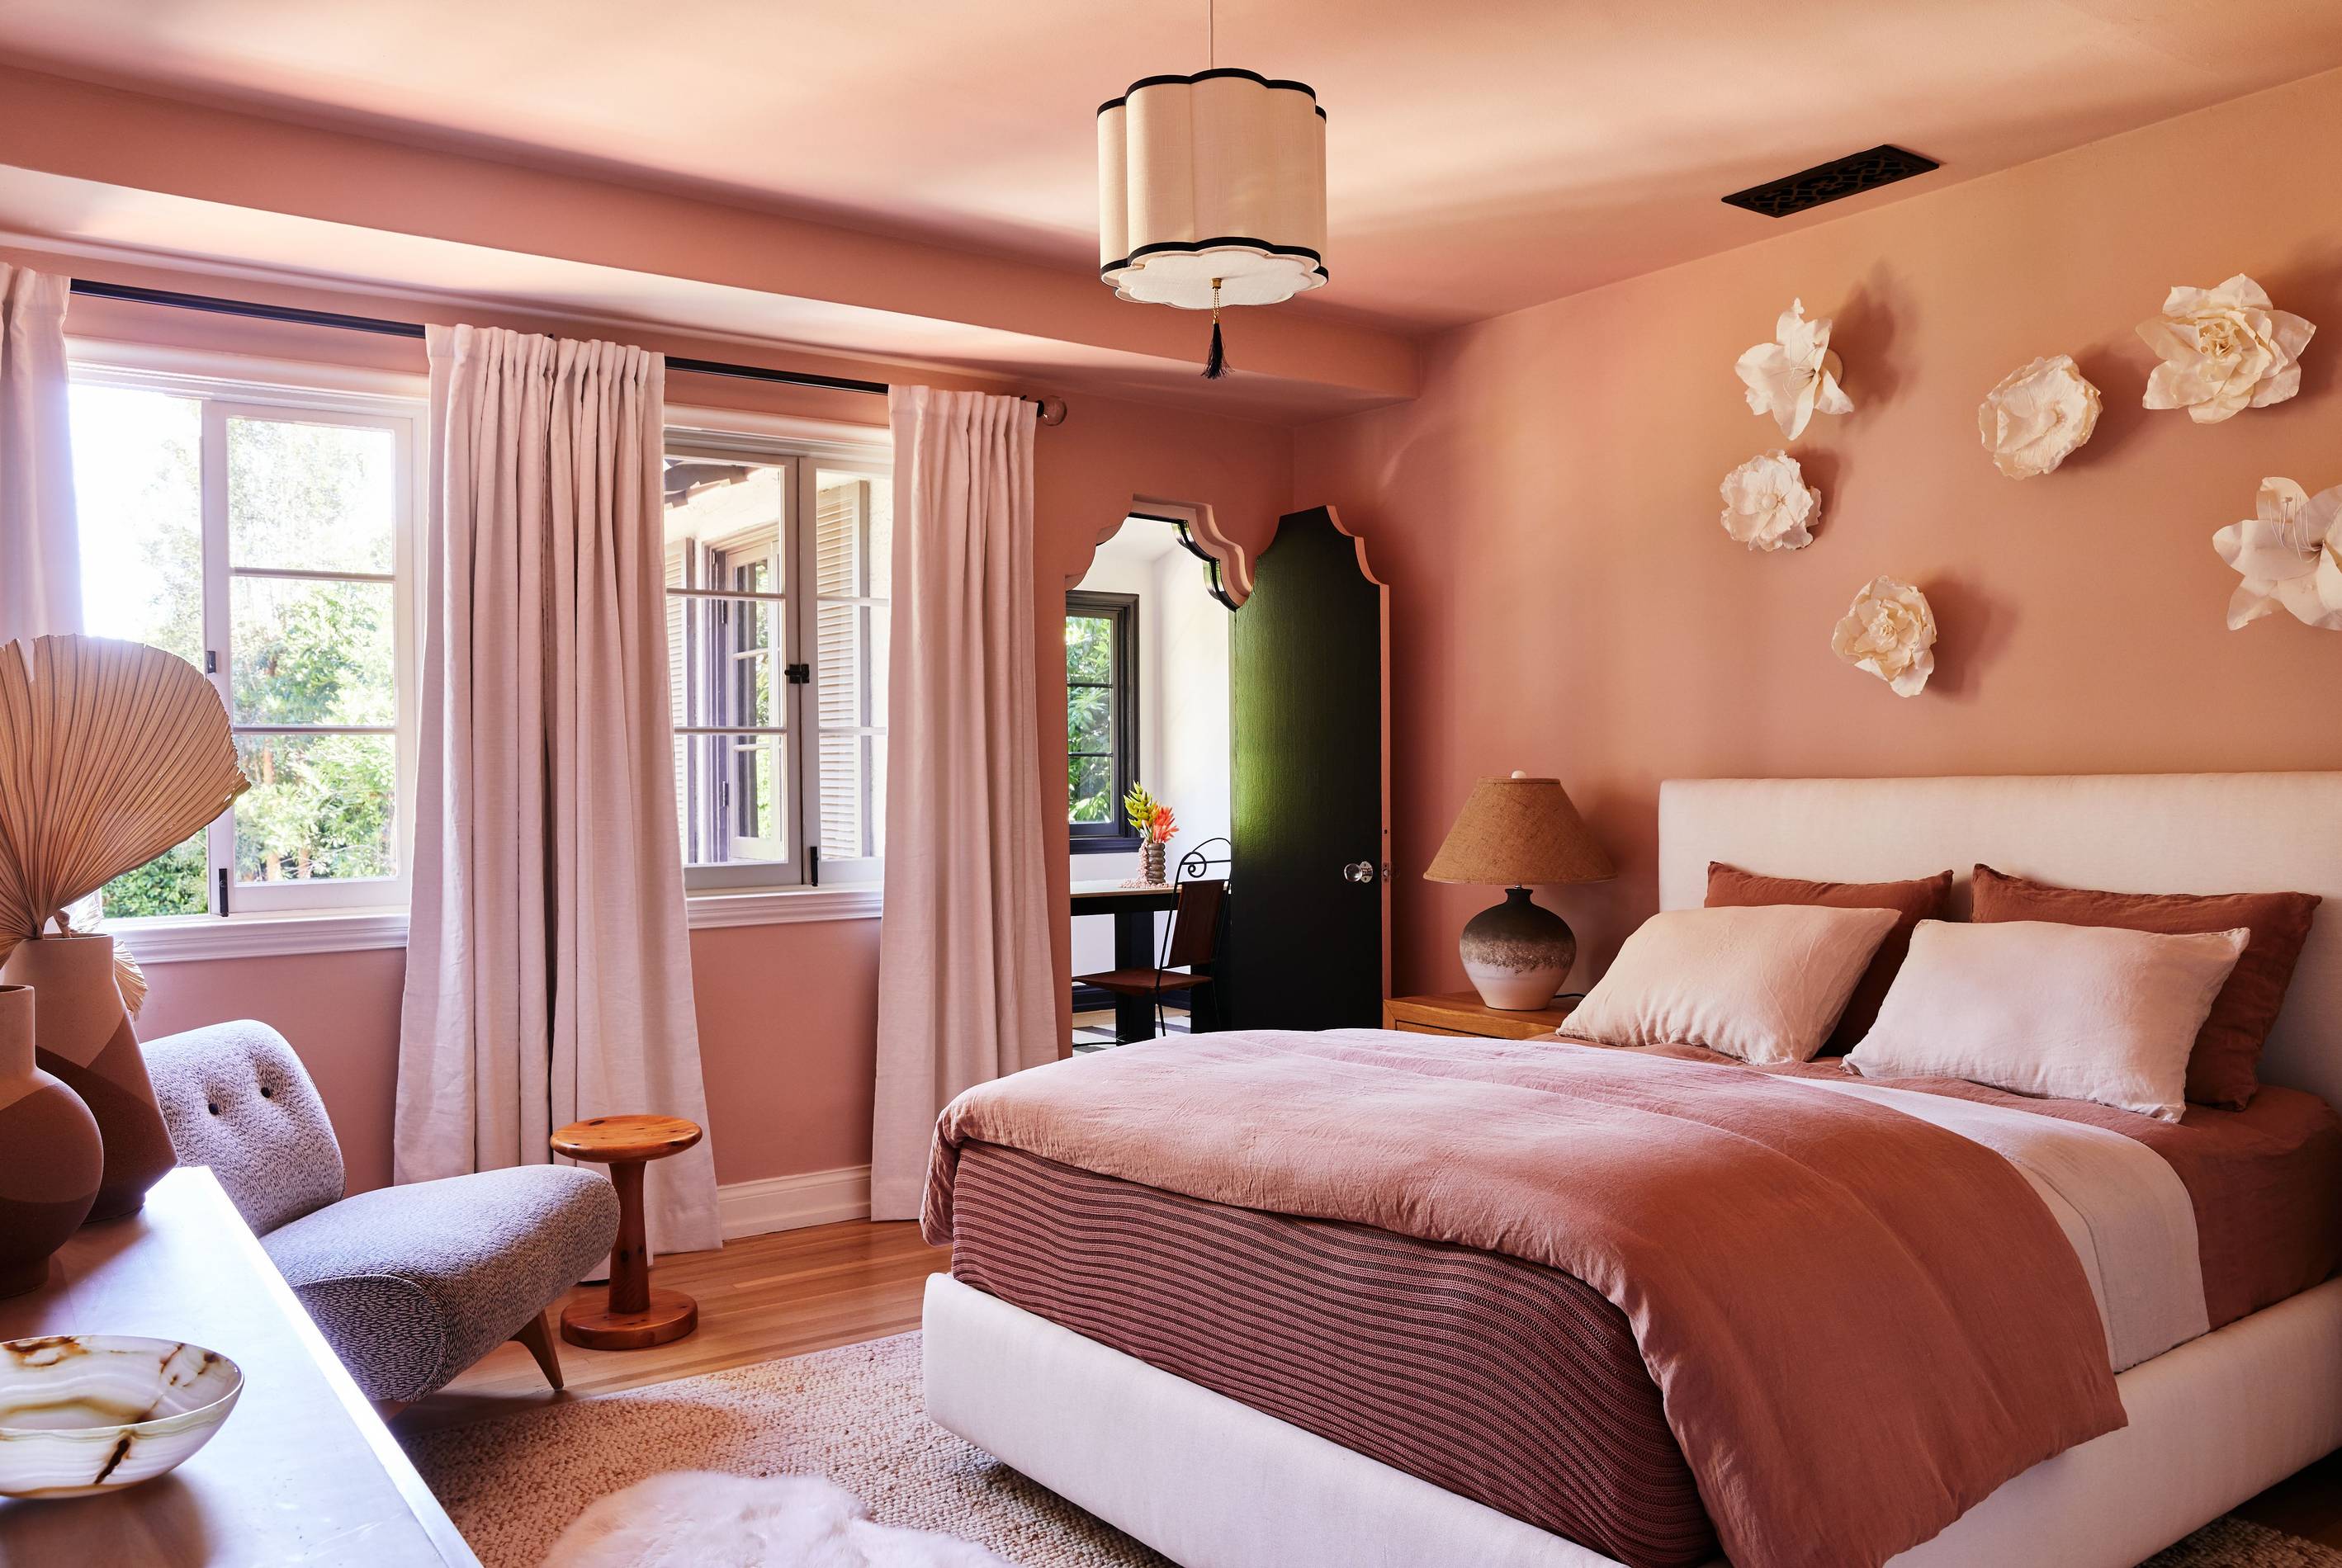 Ash Staging concept house in Los Angeles, rose-colored secondary bedroom